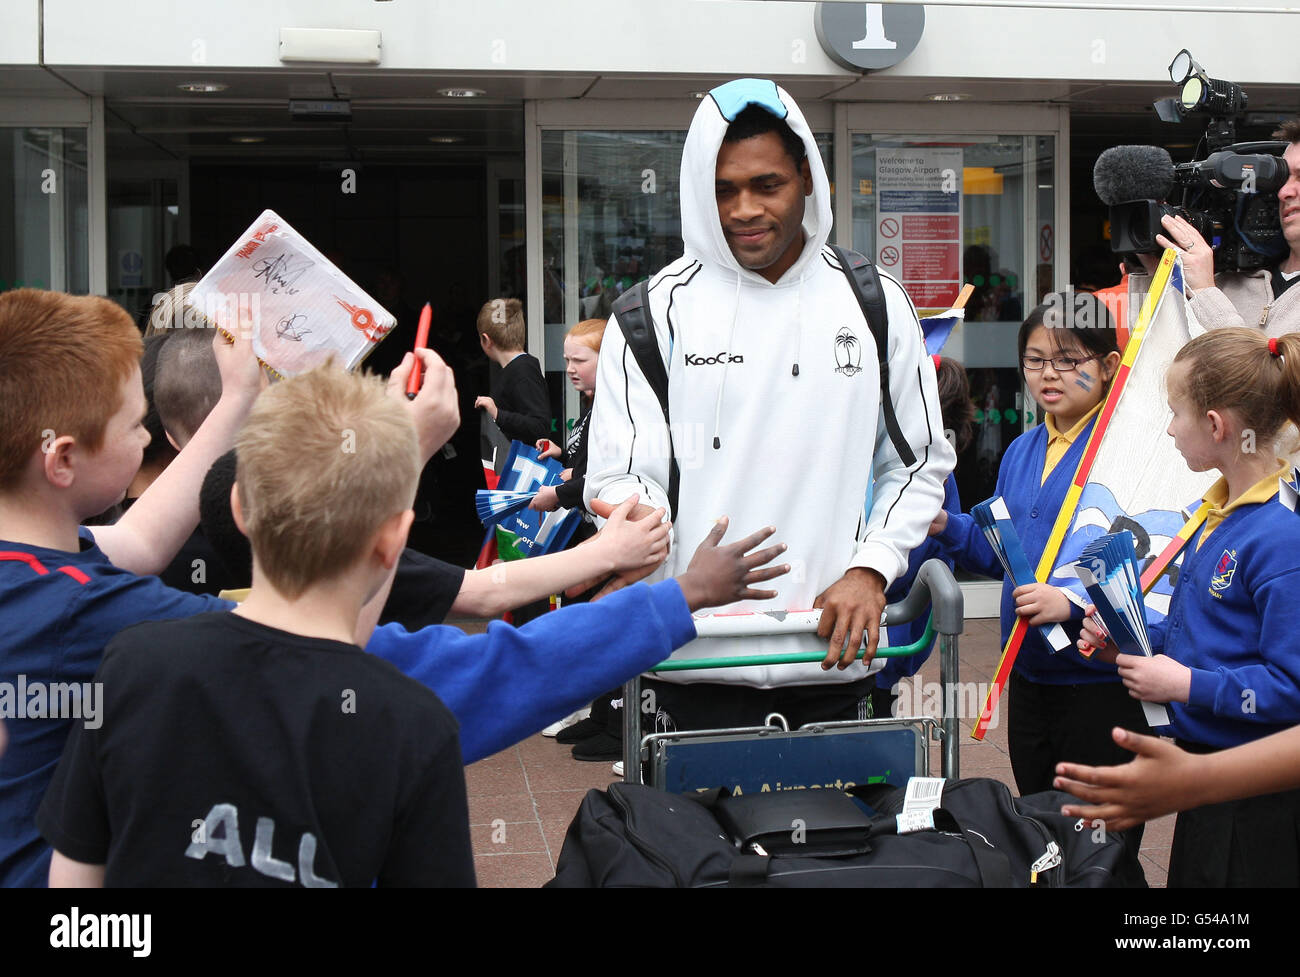 Rugby Union - Glasgow Sevens - International Teams Arrive - Glasgow Airport. Members of the Fiji rugby 7s teams arrive at Glasgow airport, Glasgow. Stock Photo